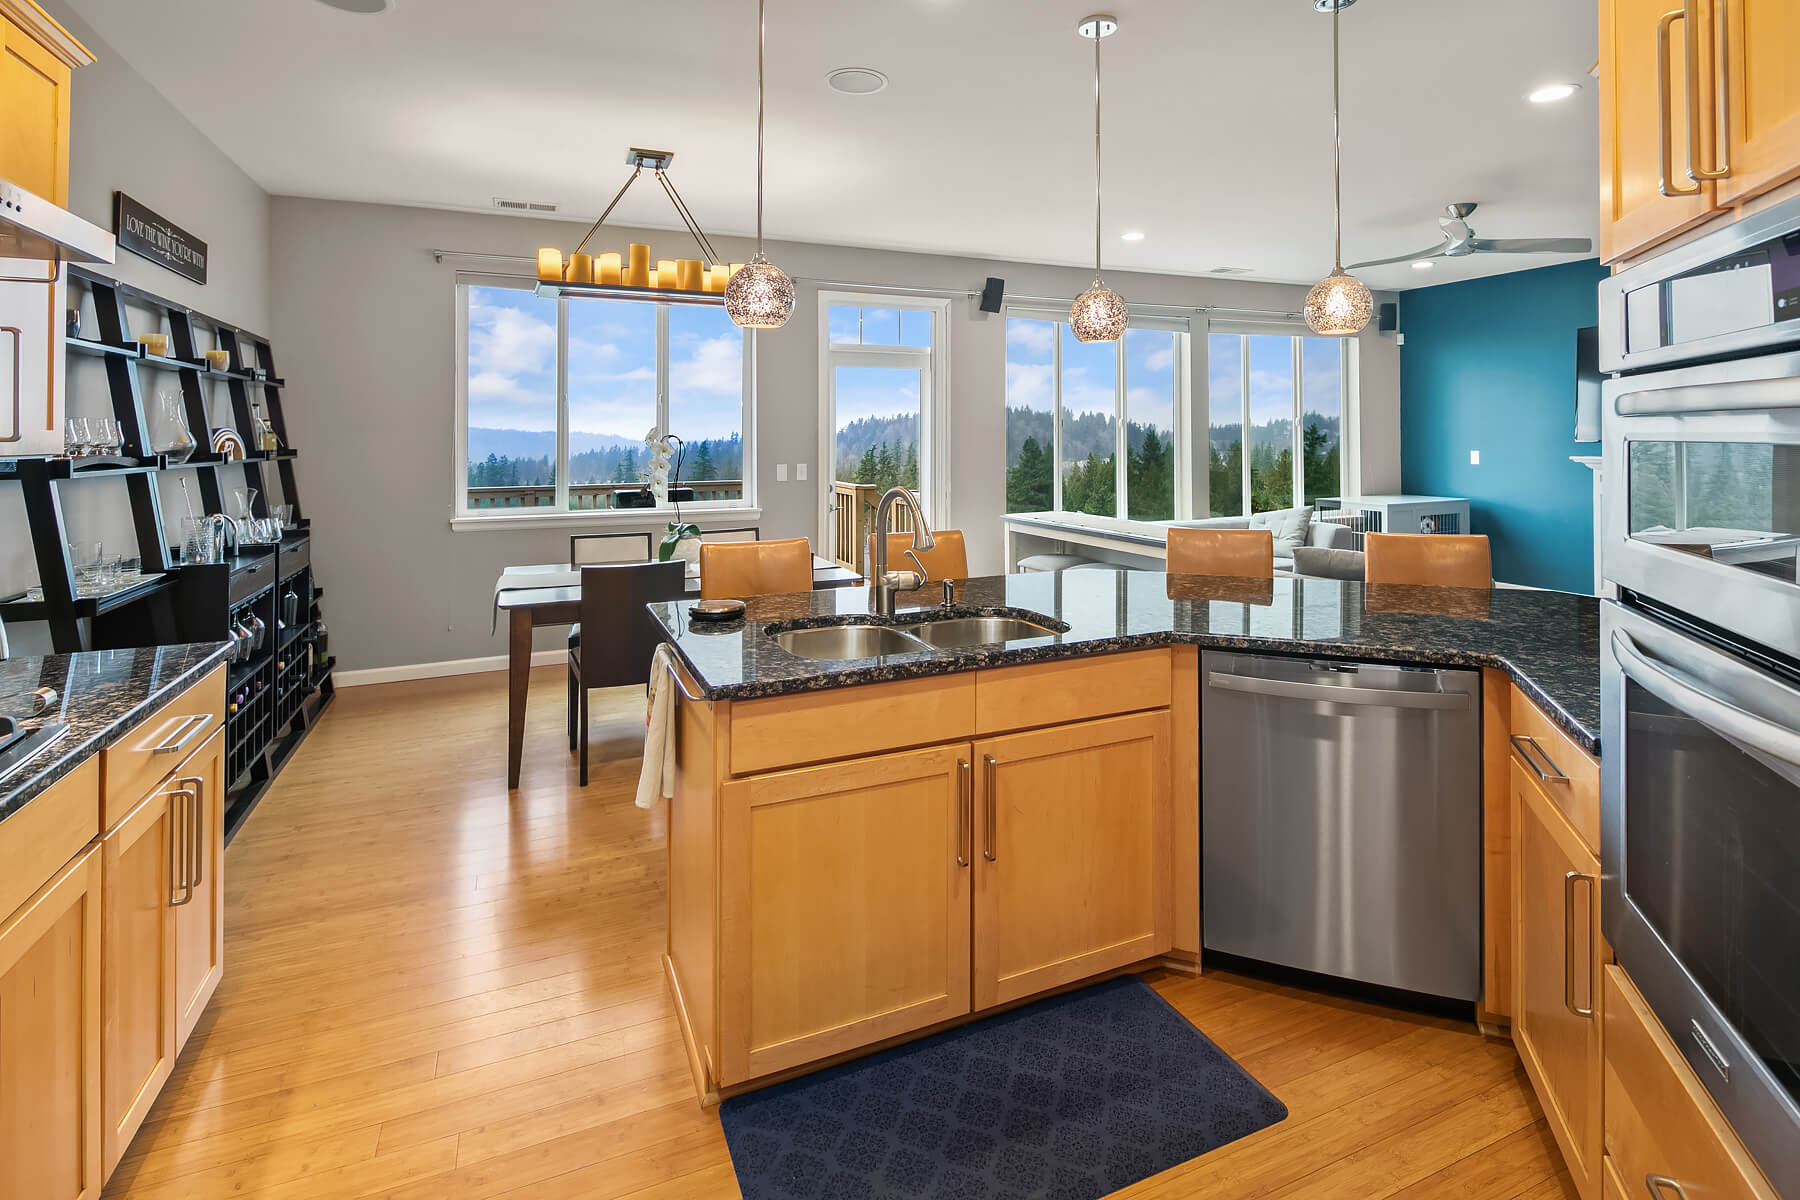 Slosson Project – Issaquah Kitchen Remodel 10